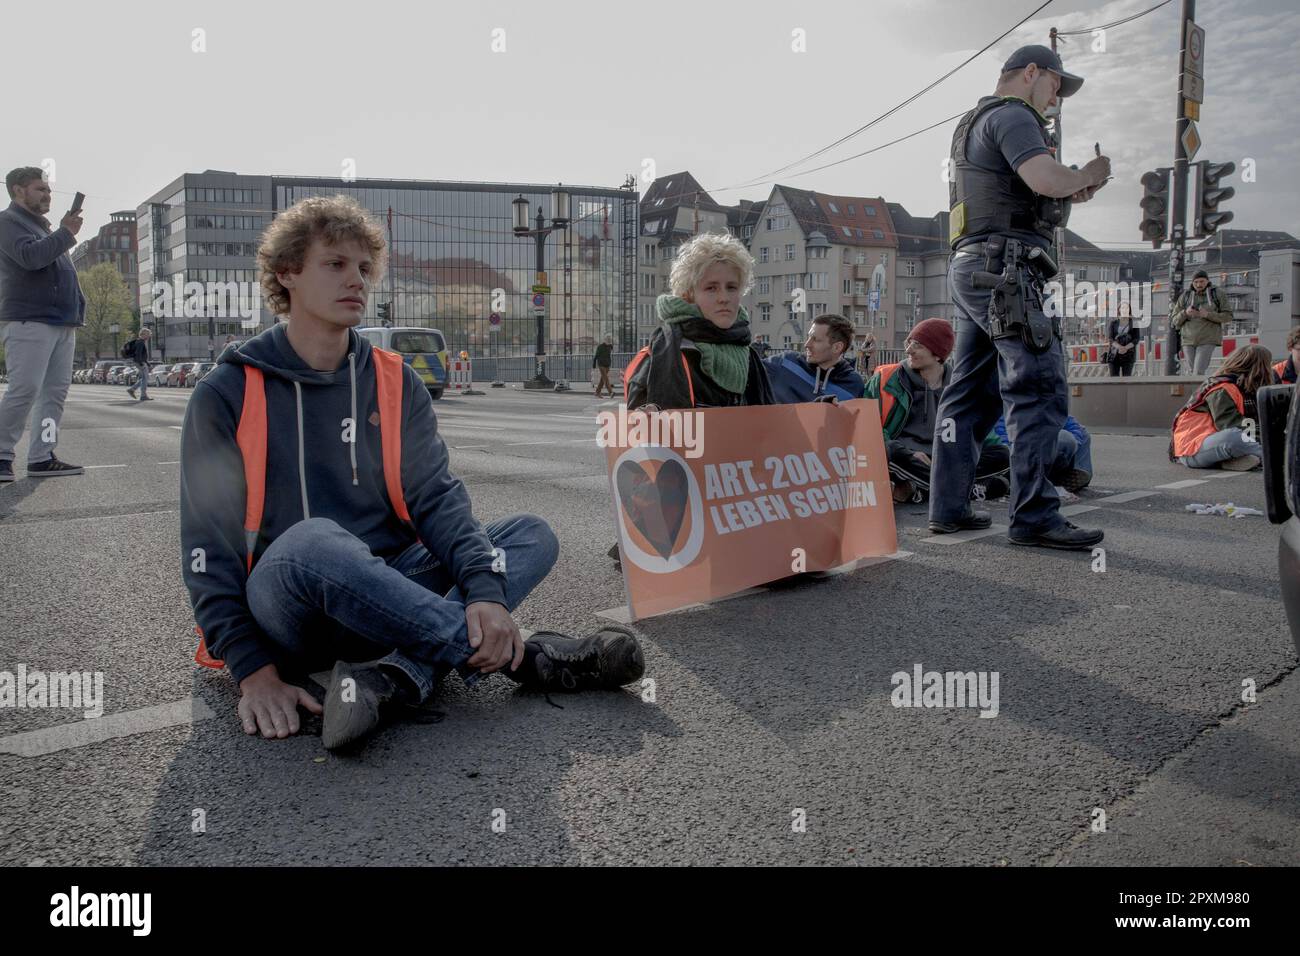 Berlin, Germany. May 2, 2023, Berlin, Germany: On Tuesday morning, May 2, 2023, the climate activist group 'Last Generation' once again blocked several streets in Berlin. The actions led to significant disruptions and traffic jams throughout the city. Several major roads and intersections were affected. The roadblocks have sparked controversy and anger from members of the public who view them as a disruption to daily life and a violation of their rights to free movement. Credit: ZUMA Press, Inc./Alamy Live News Stock Photo